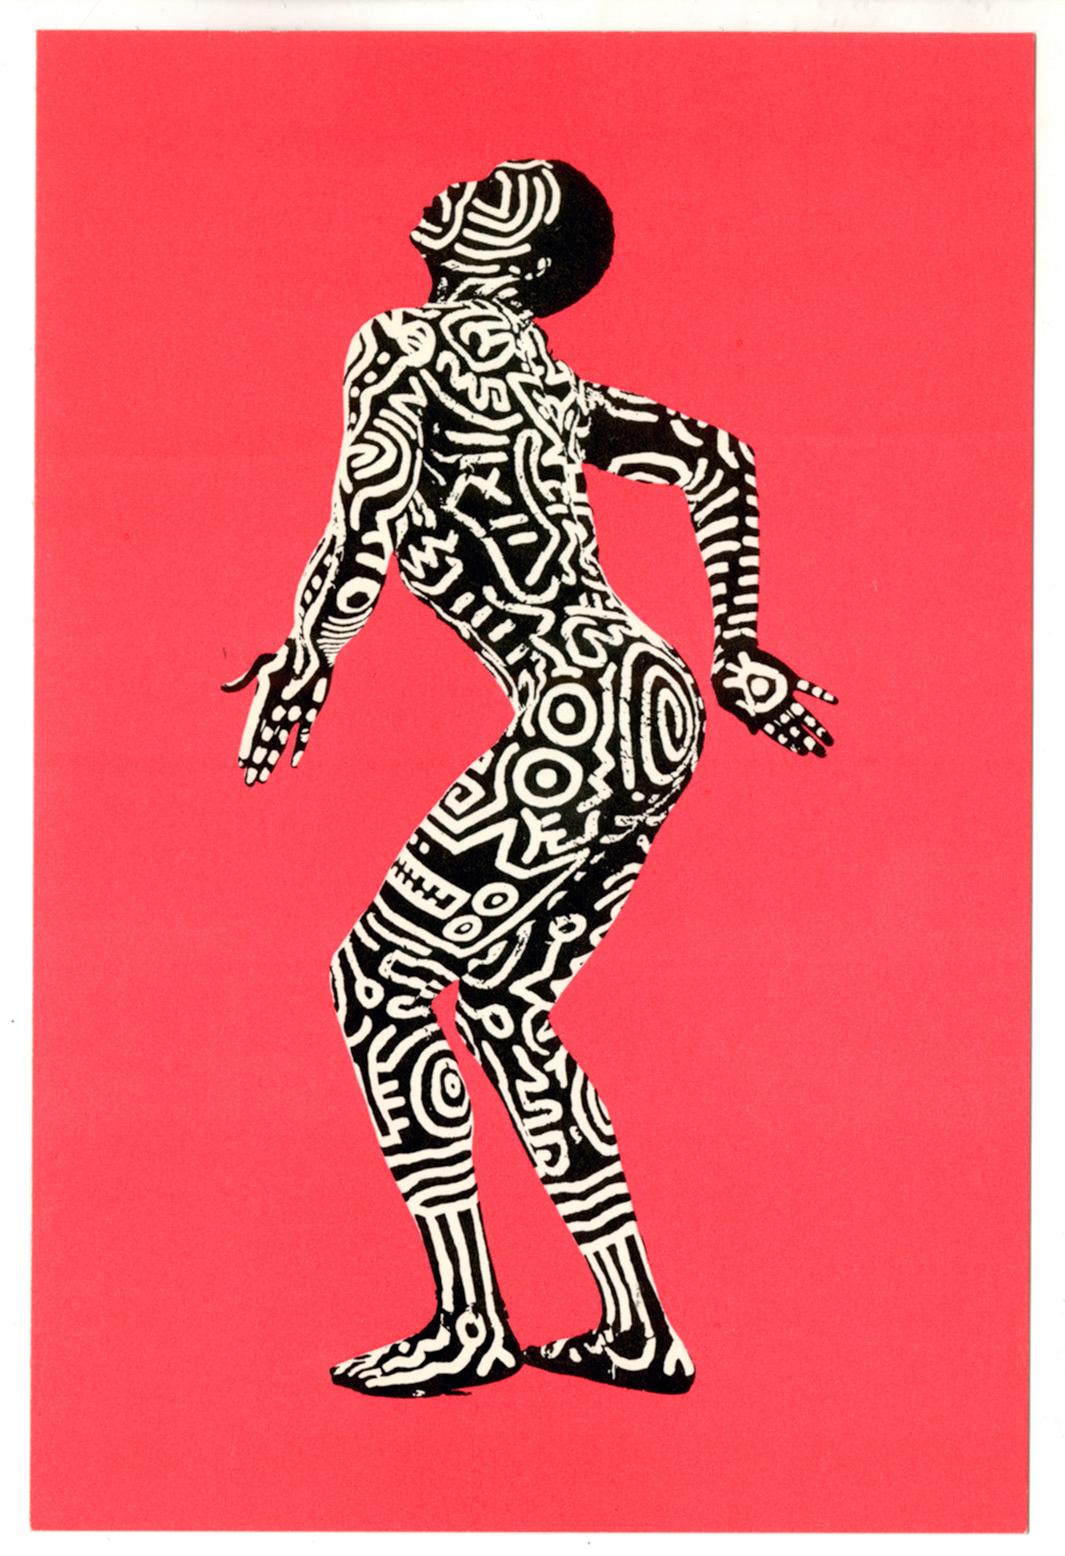 Keith Haring Into 84/Keith haring Painted Man 1983: 
Announcement card for Keith Haring’s well-documented exhibition, 'Into 84' at Tony Shafrazi Gallery, New York, 1983. For this series Haring borrowed Bill T. Jones' body — from head to toe — as the